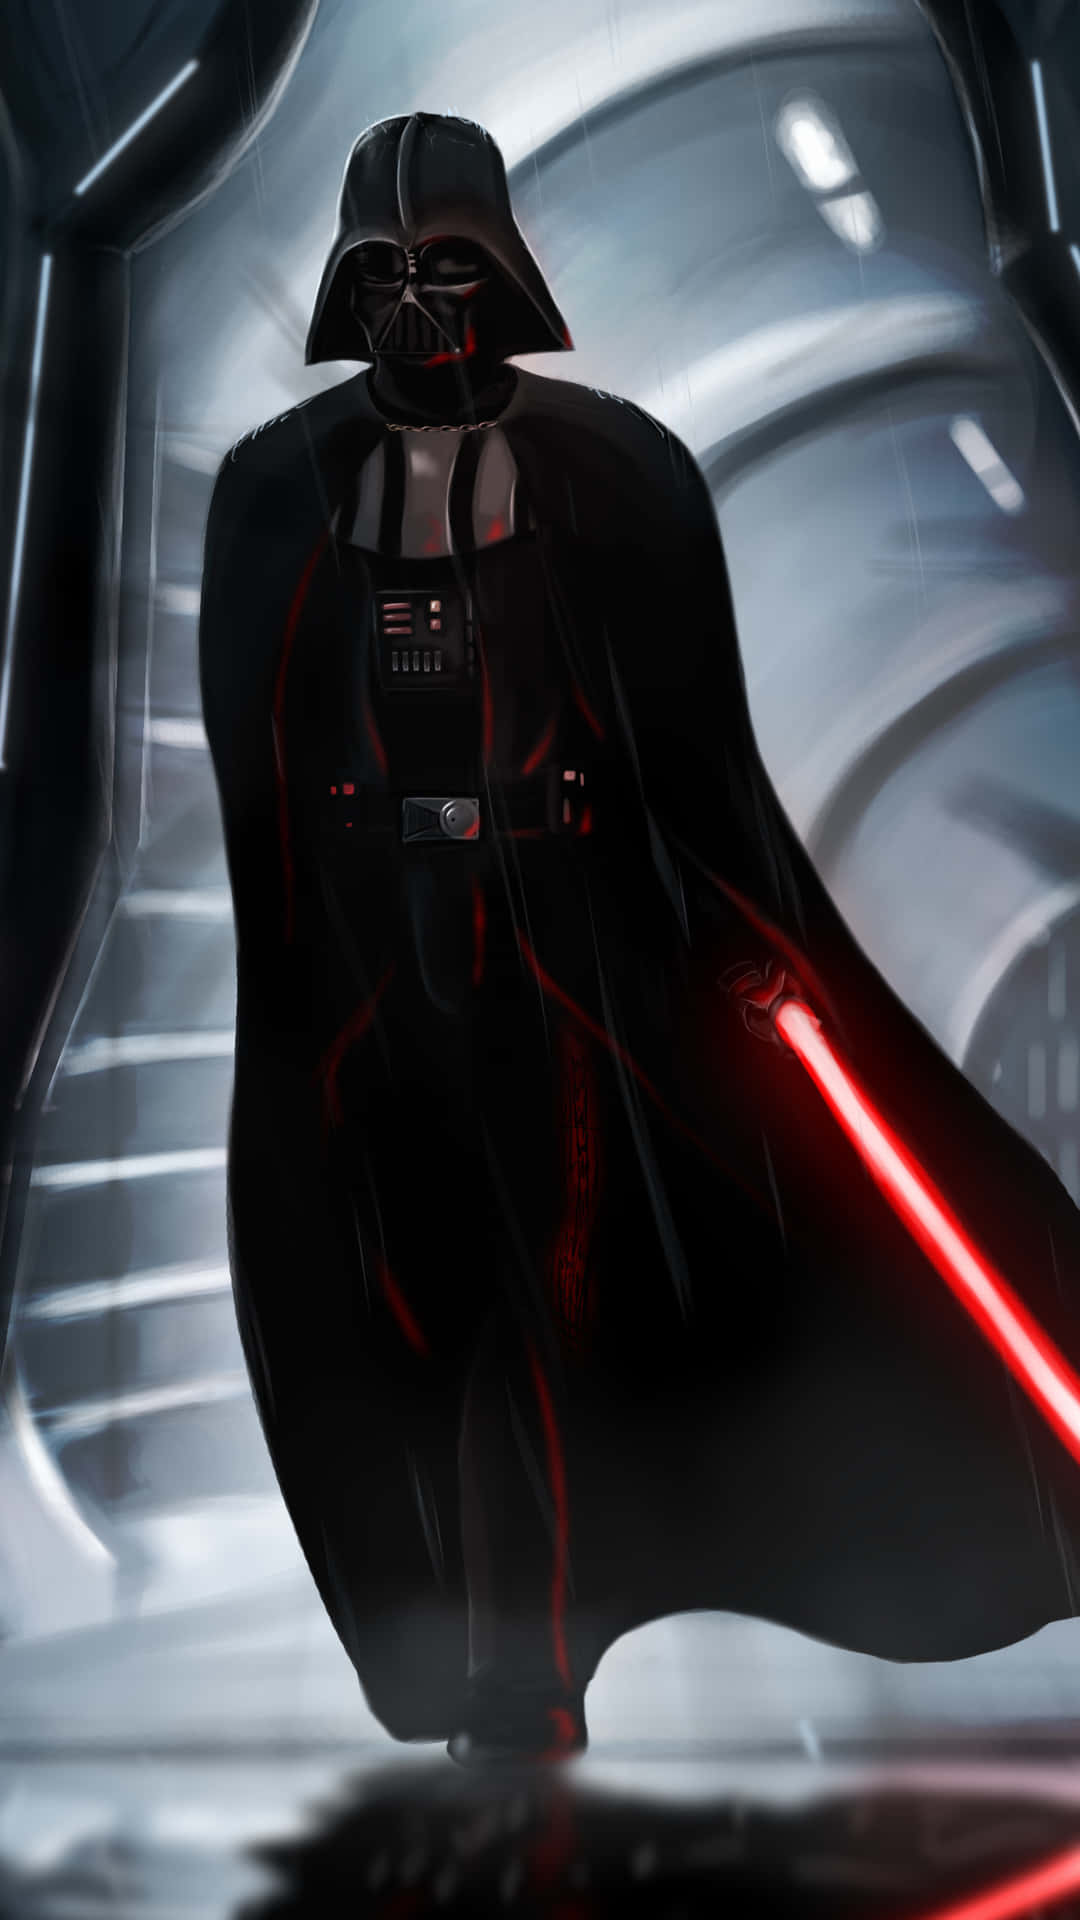 Darth Vader, the iconic villain from Star Wars